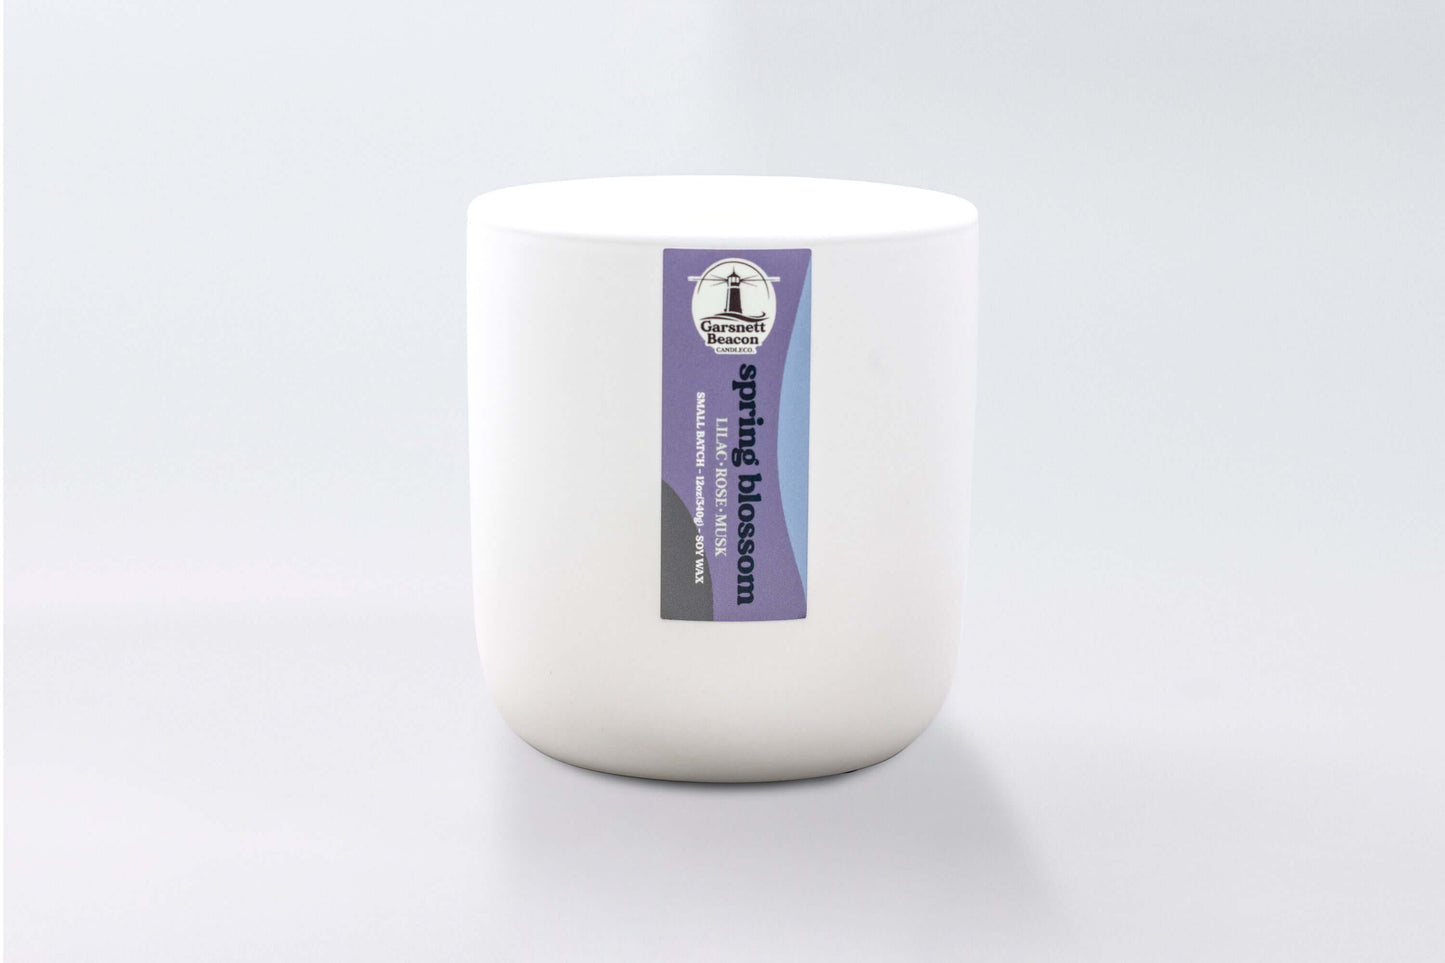 Lilac Rose Lilies Light Musk scented candles called Spring Blossom in glass ceramic tin and wax melts